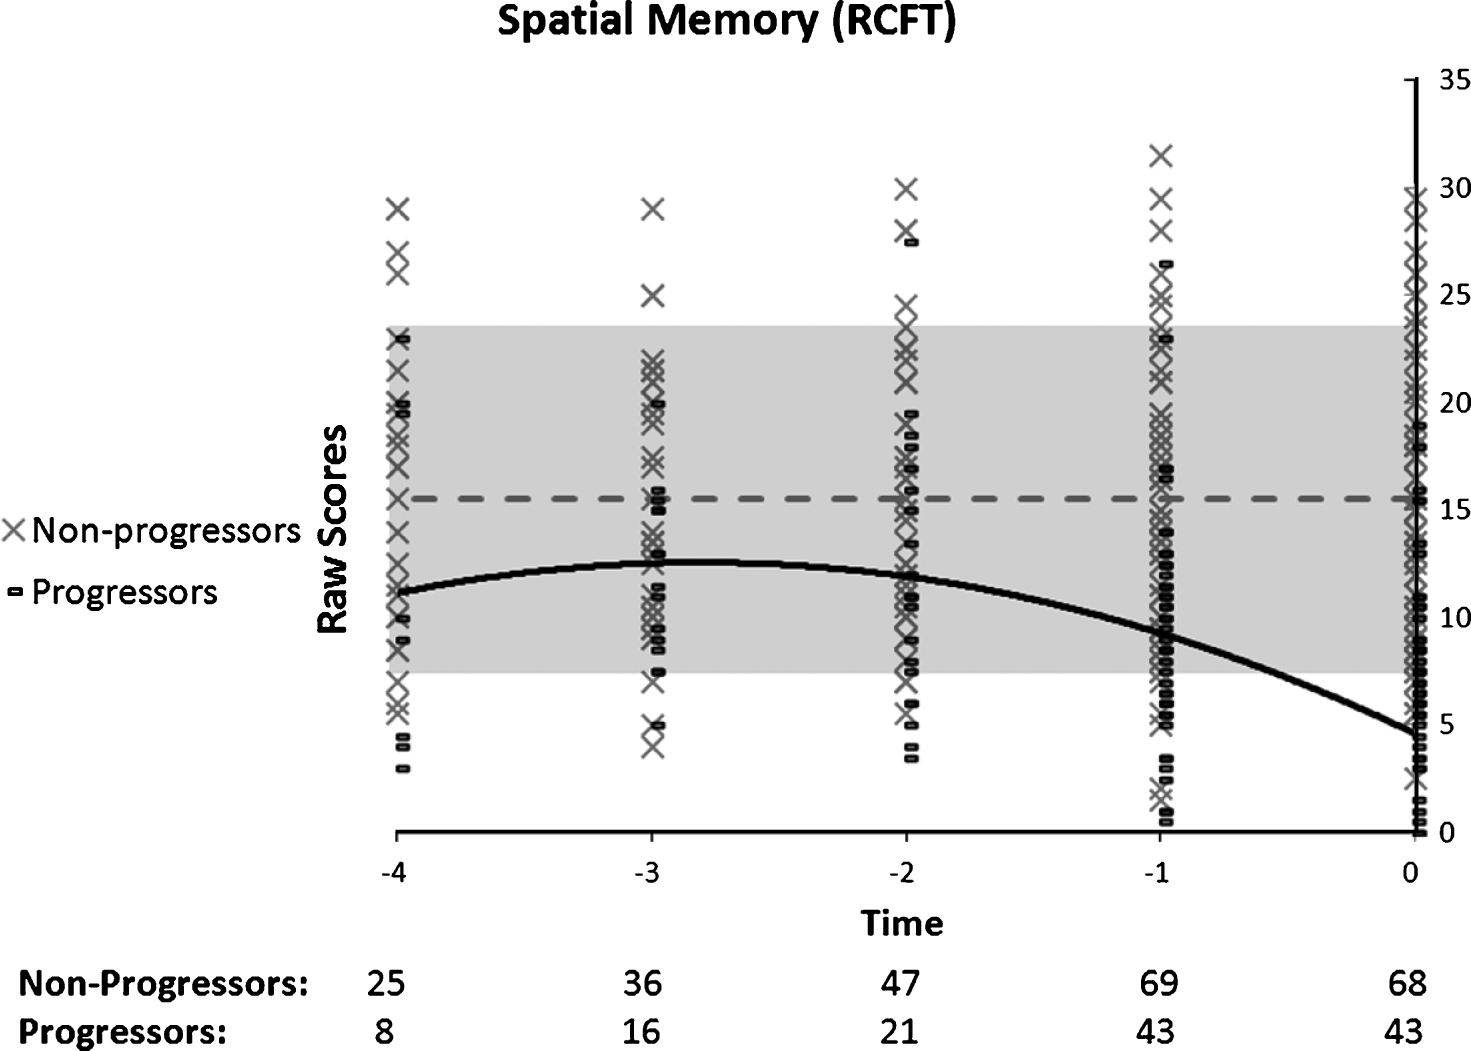 Performance on spatial memory as a function of time to diagnosis (for progressors) or on the last 5 cognitive assessments (for non-progressors). A quadratic function best describes the distribution for the progressors: black line. No significant model is found in the non-progressors: dotted grey line.